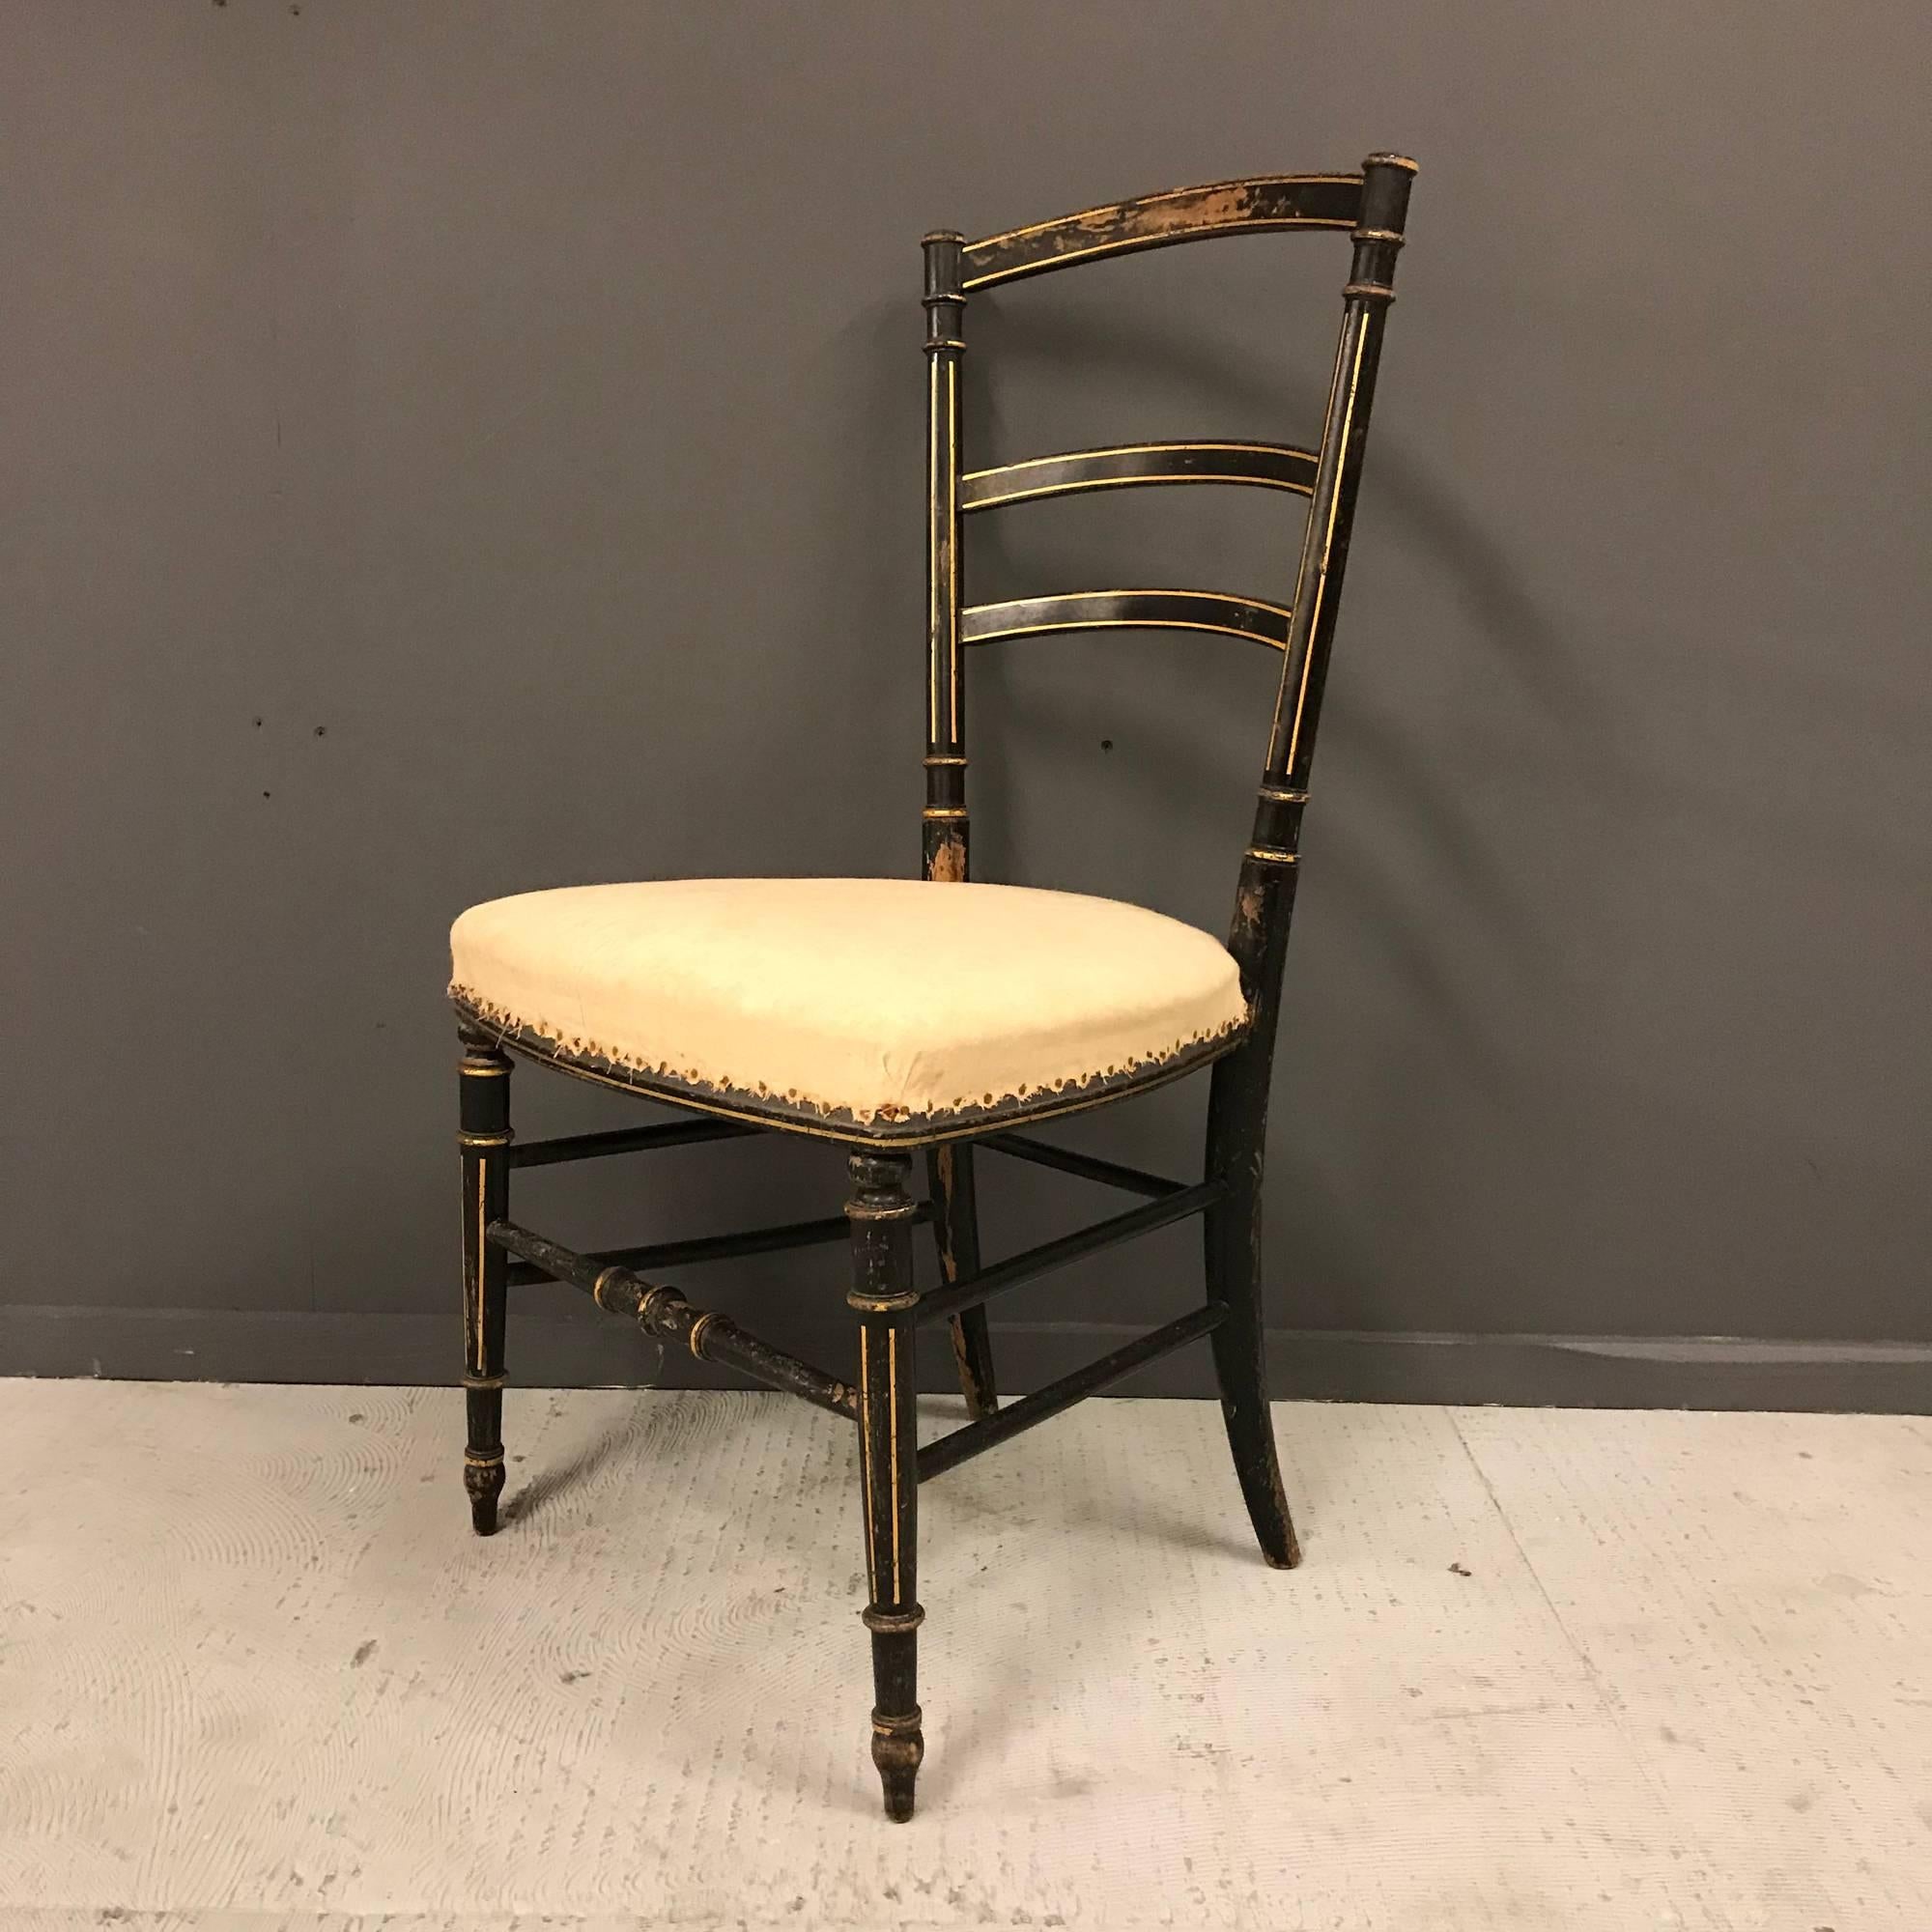 Charming French antique chair. Was made in France during the late 19th century. This Napoleon III chair has been stripped and remains in very good condition.
Size of this antique Napoleon III chair
Measure: 45 x 45 x 83 seat 40 cm.